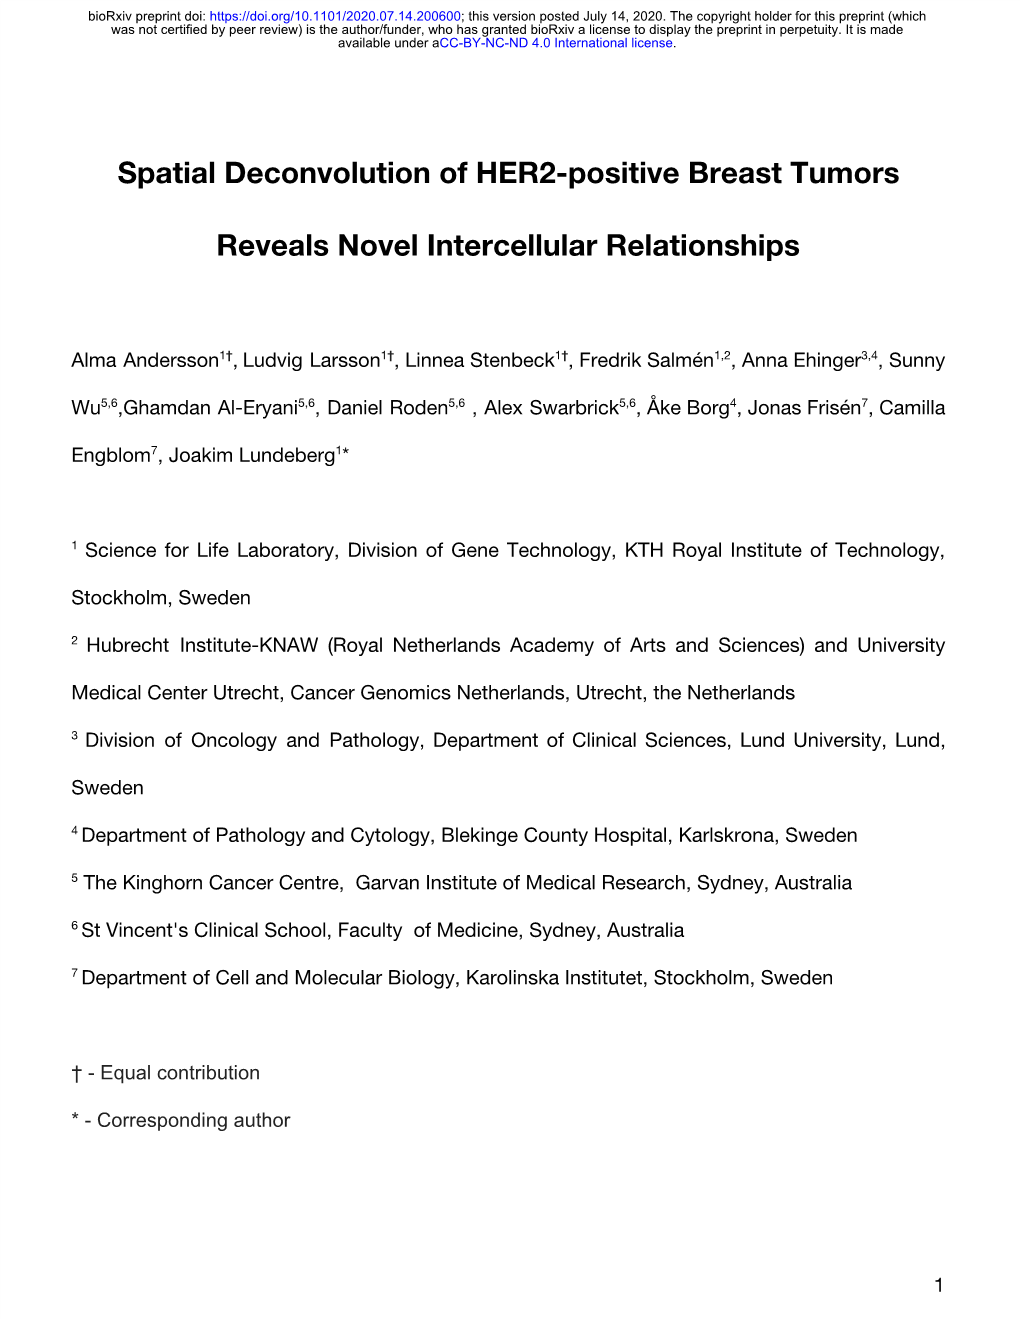 Spatial Deconvolution of HER2-Positive Breast Tumors